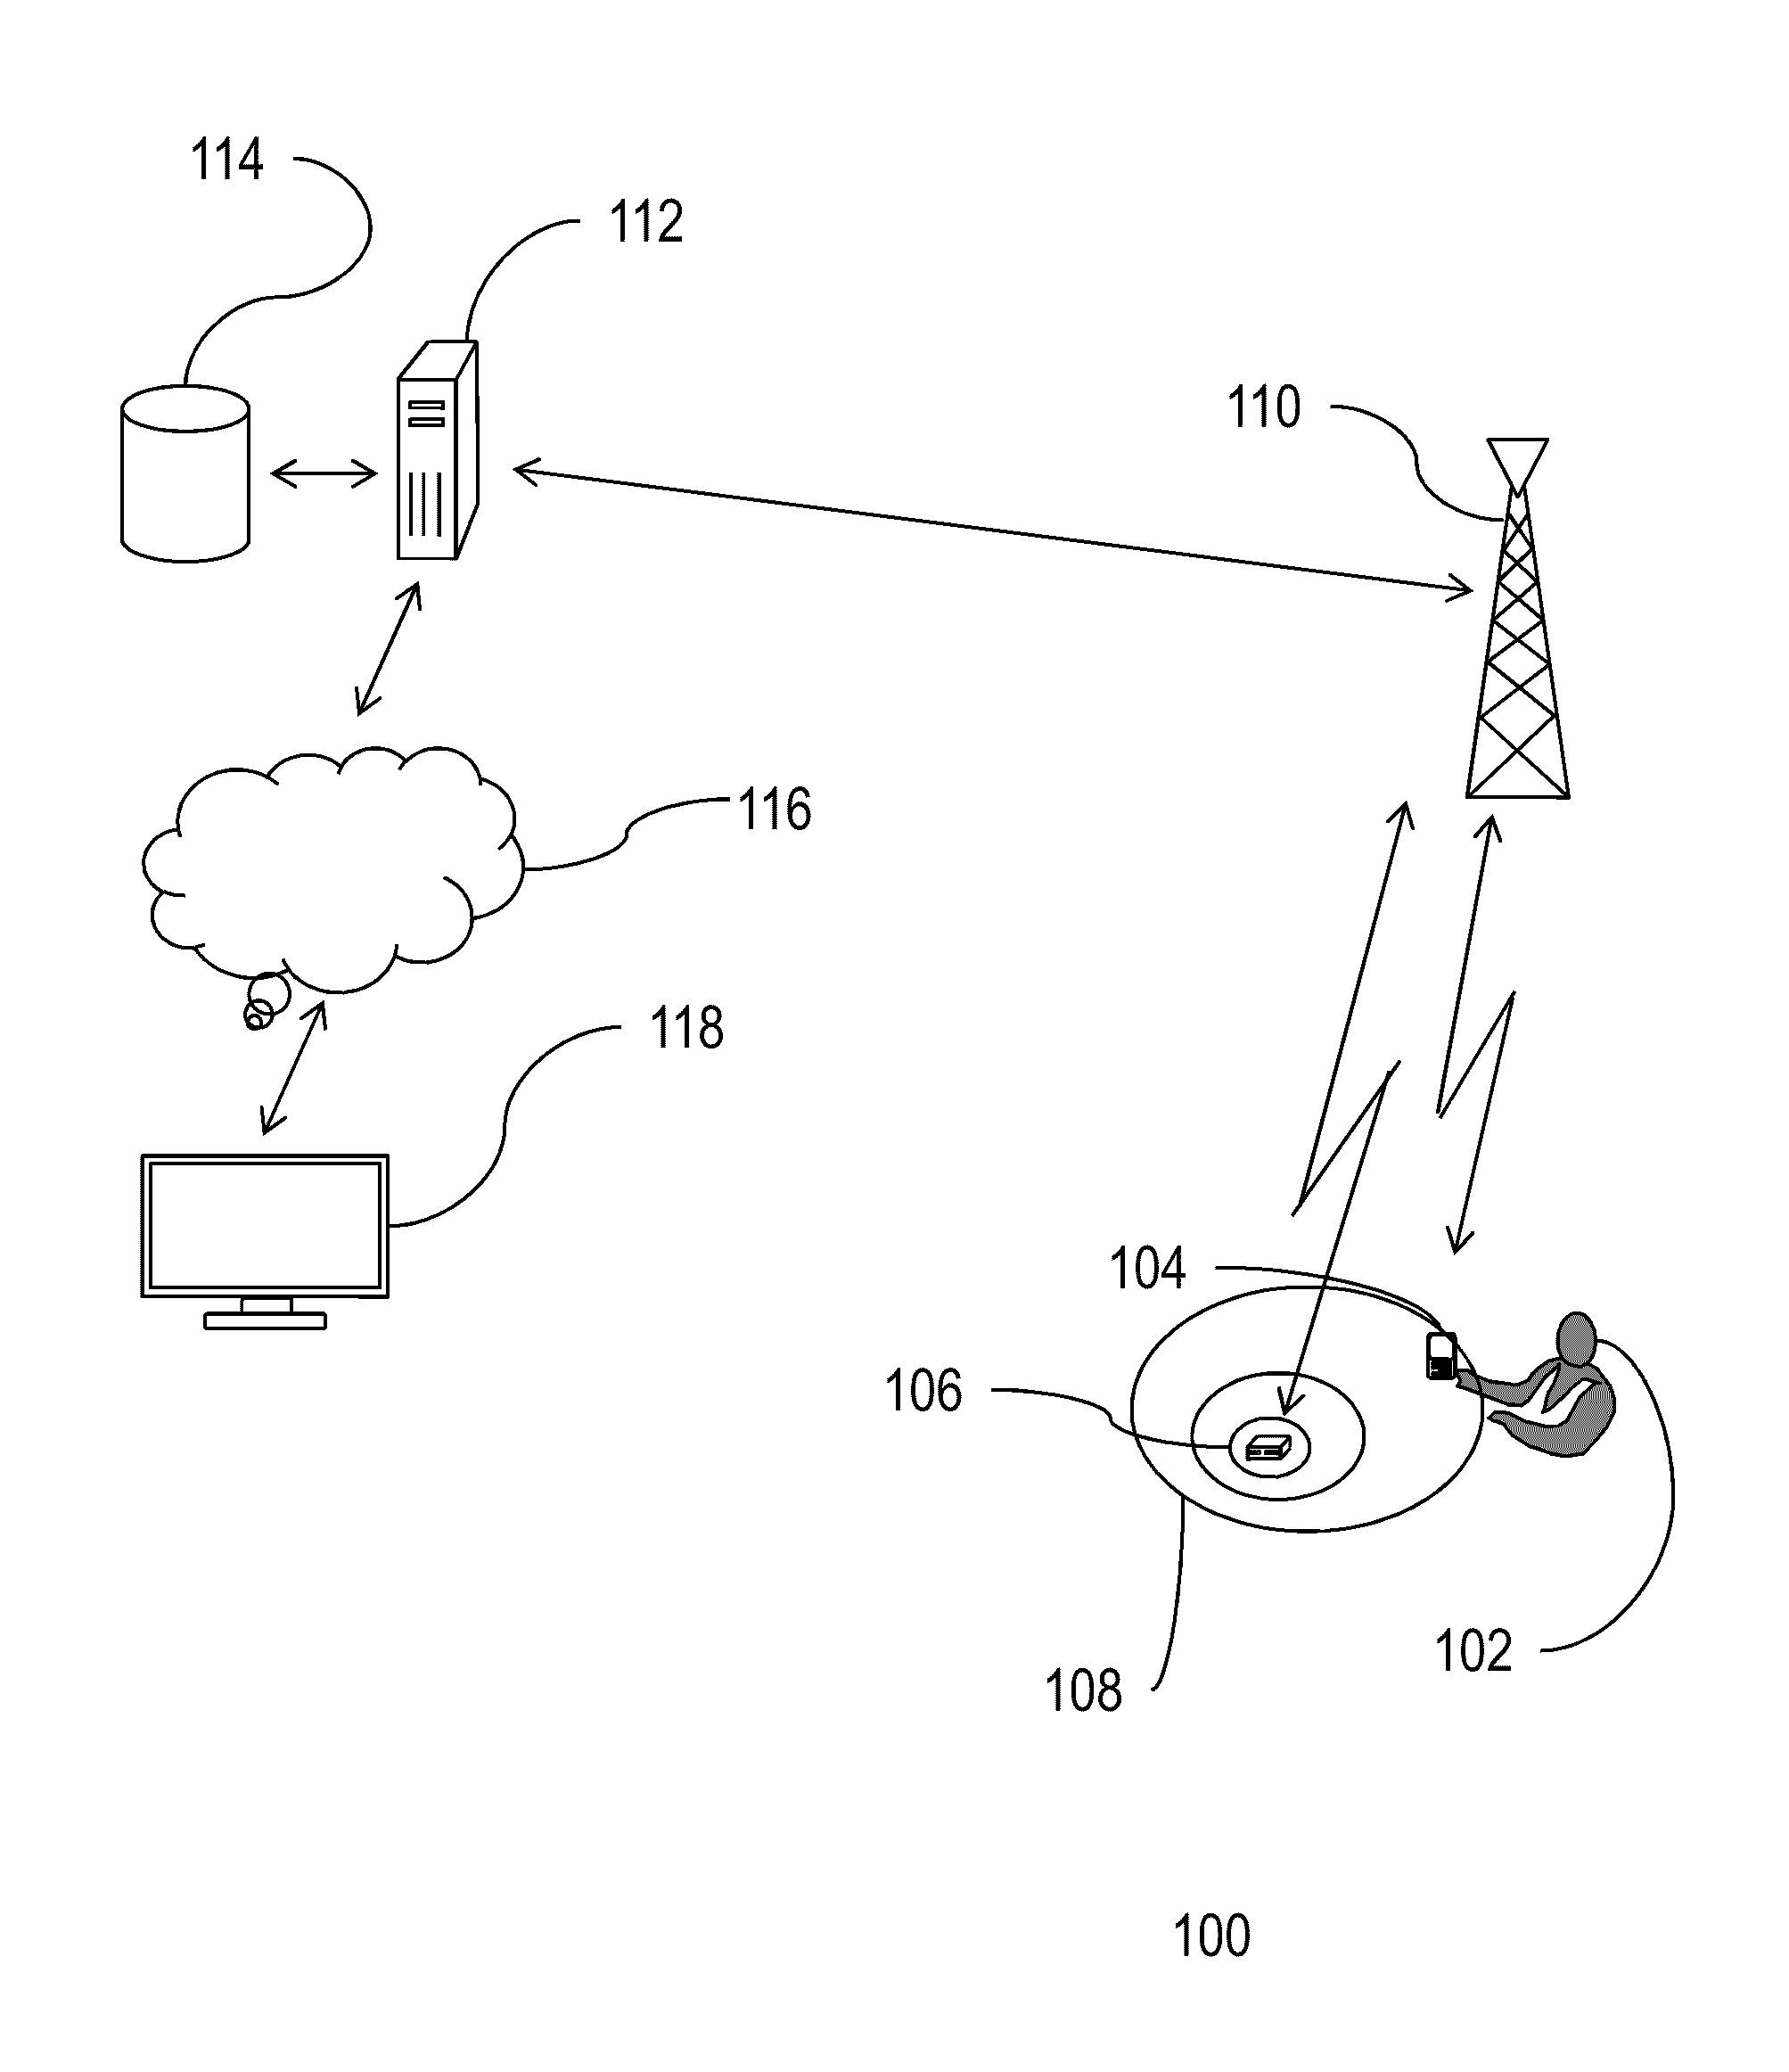 Disabling of services on a communication device